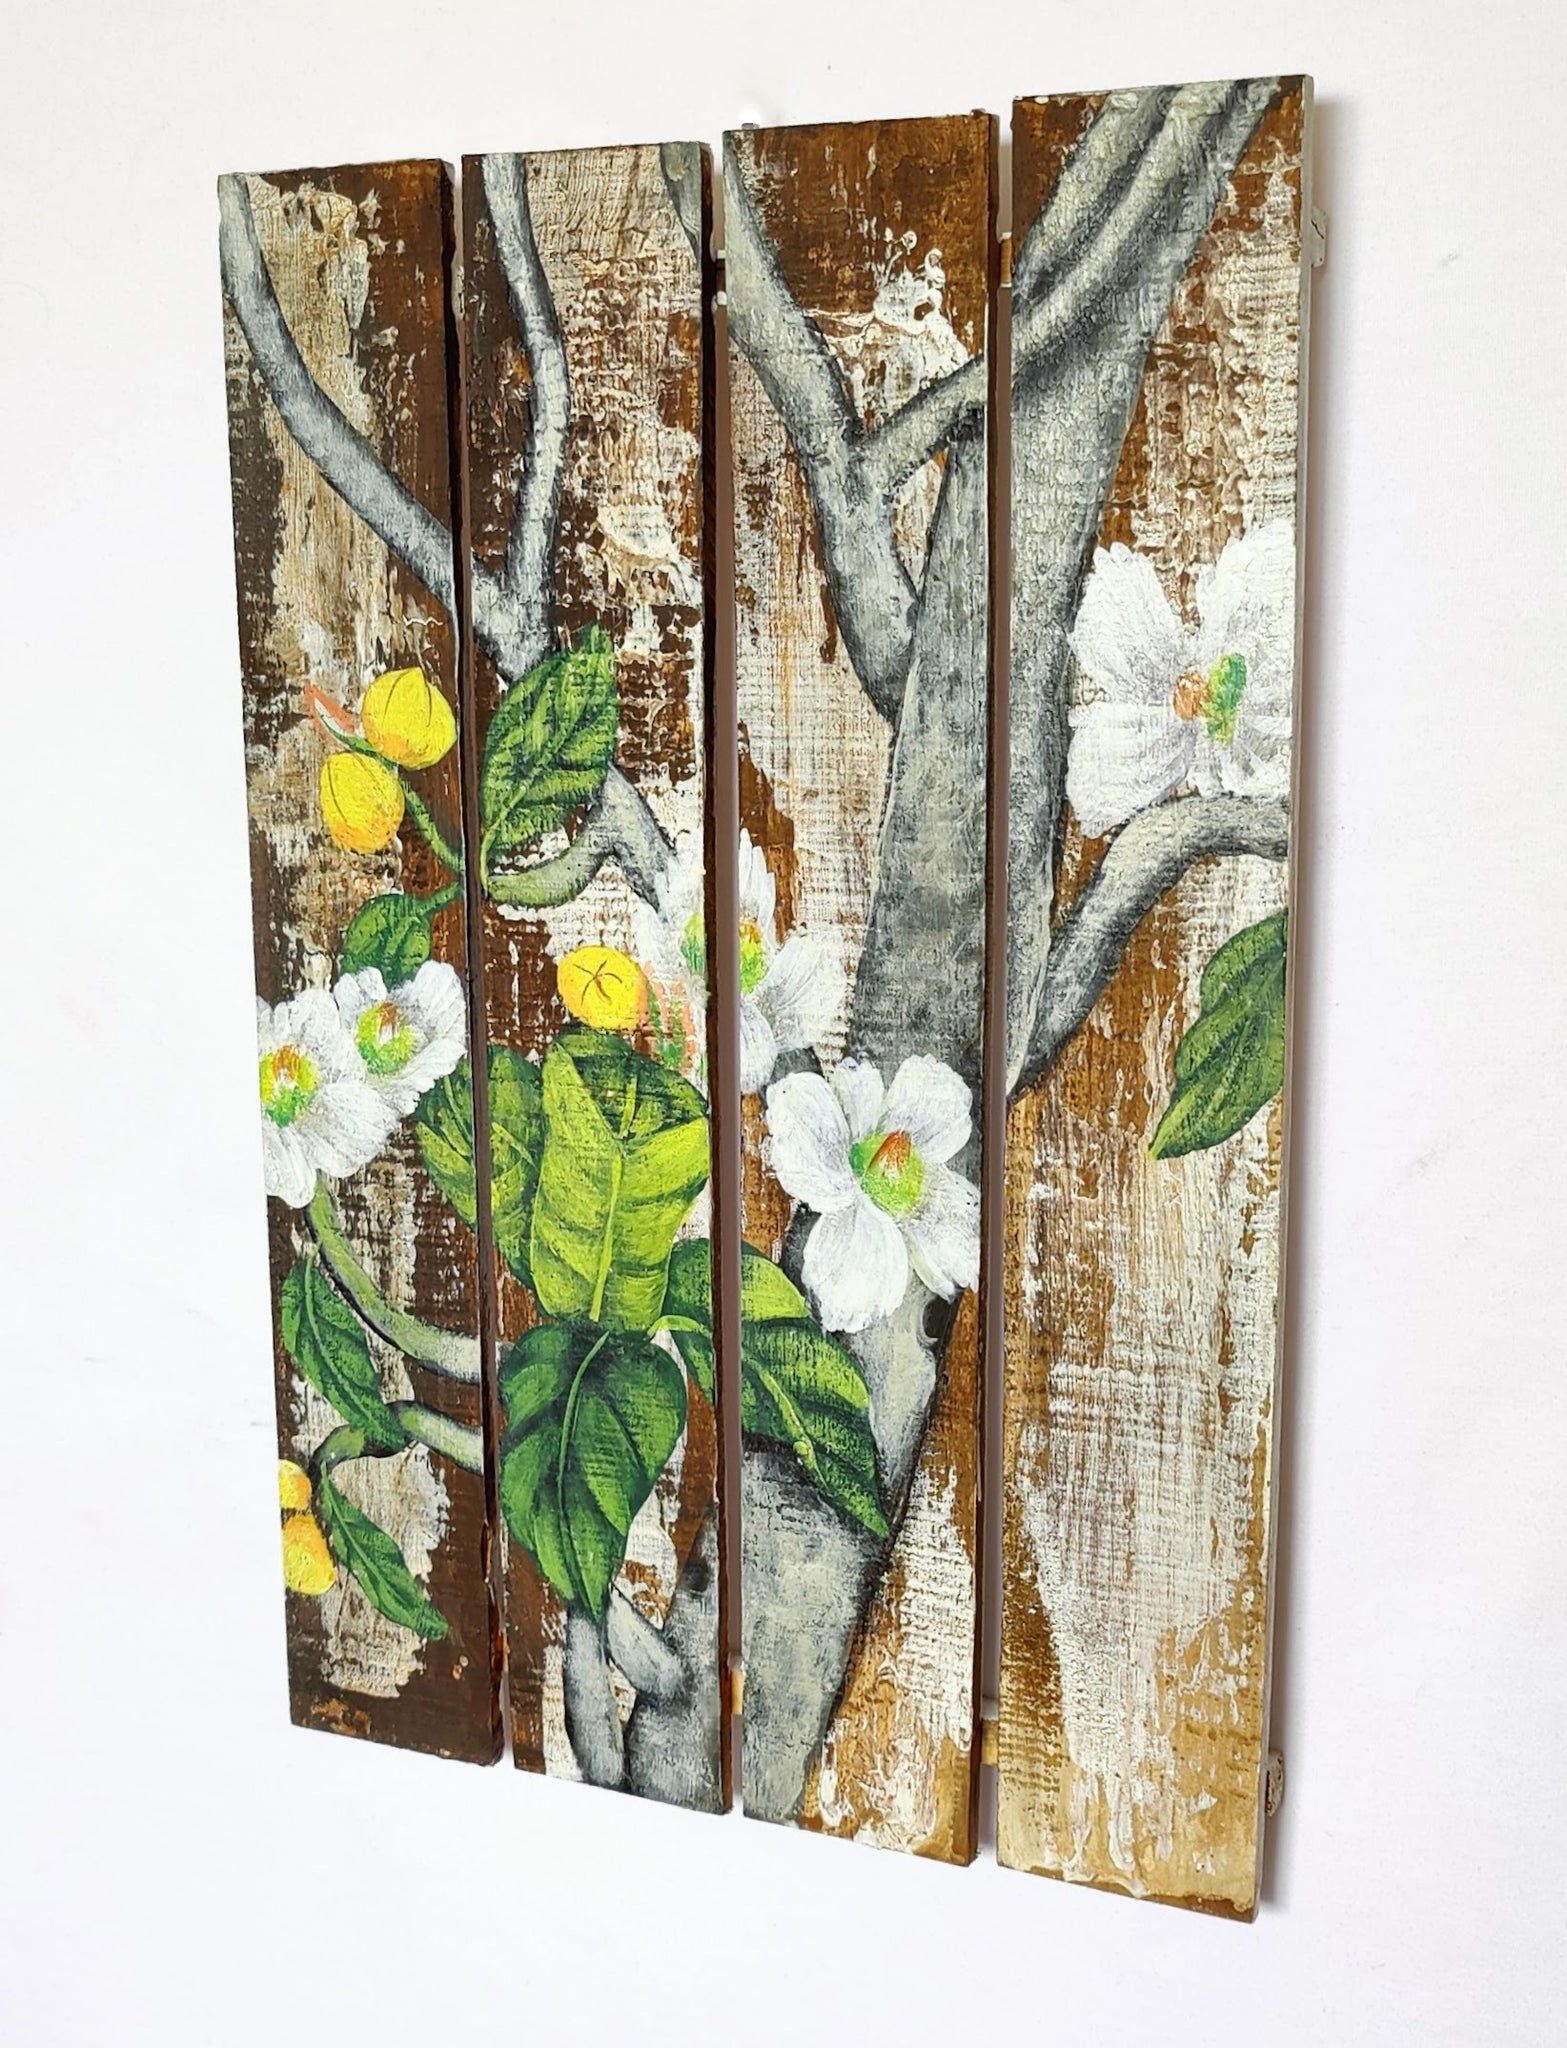 Home Decor: EXQUISITE WALL HANGING DECOR: Beautiful Hand Painted